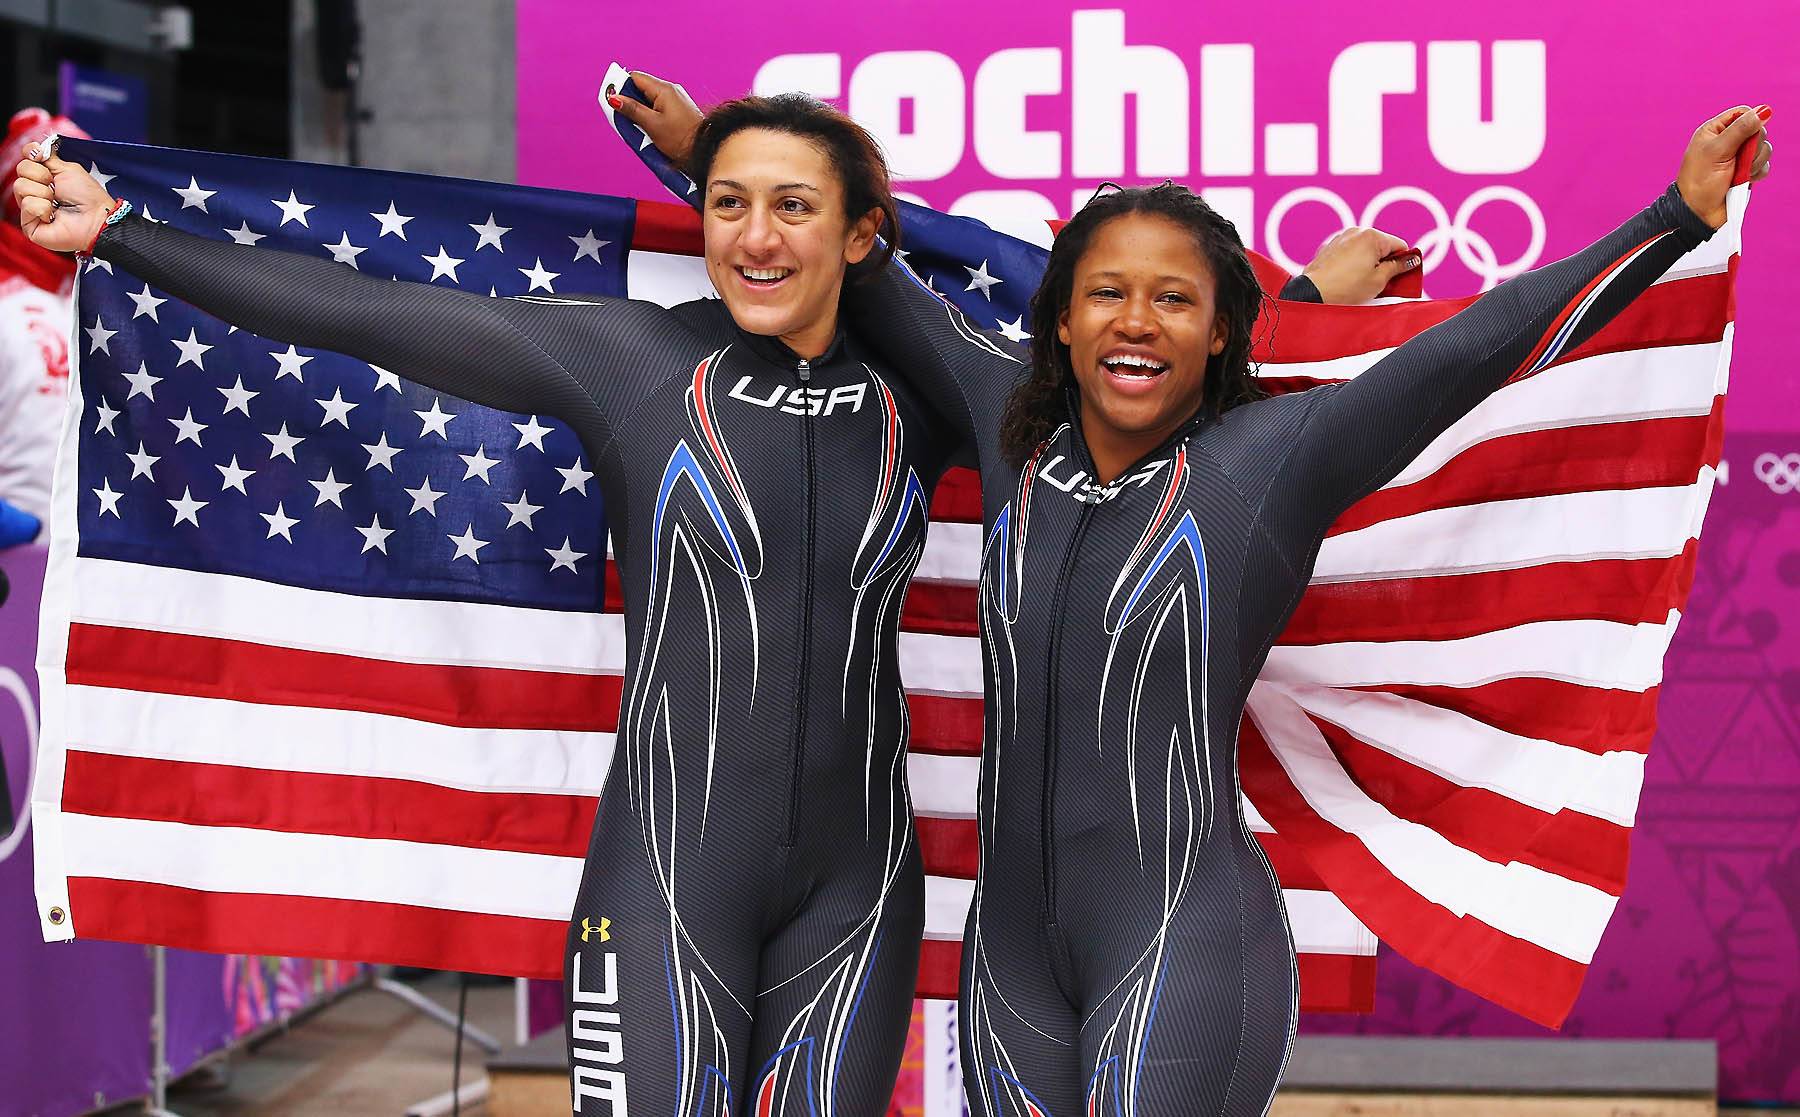 Six Months to Gold - After only six months of training for bobsledding, Williams, along with her partner Elana Meyers, won the silver medal in the bobsledding duo competition at the Sochi Olympics on Feb. 19.(Photo: Al Bello/Getty Images)